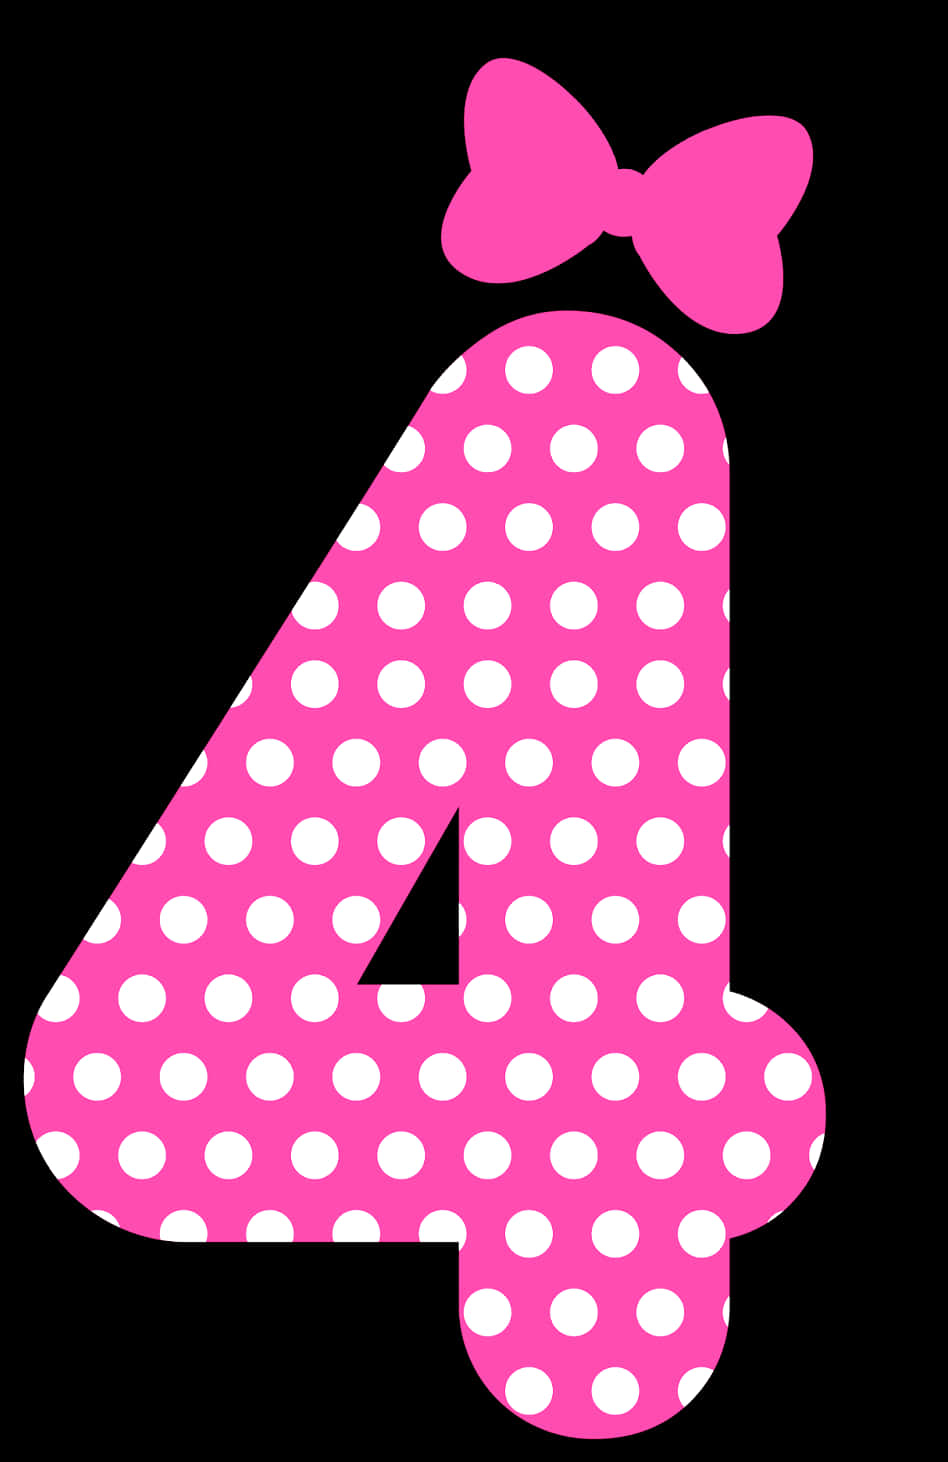 A Pink Number With White Dots